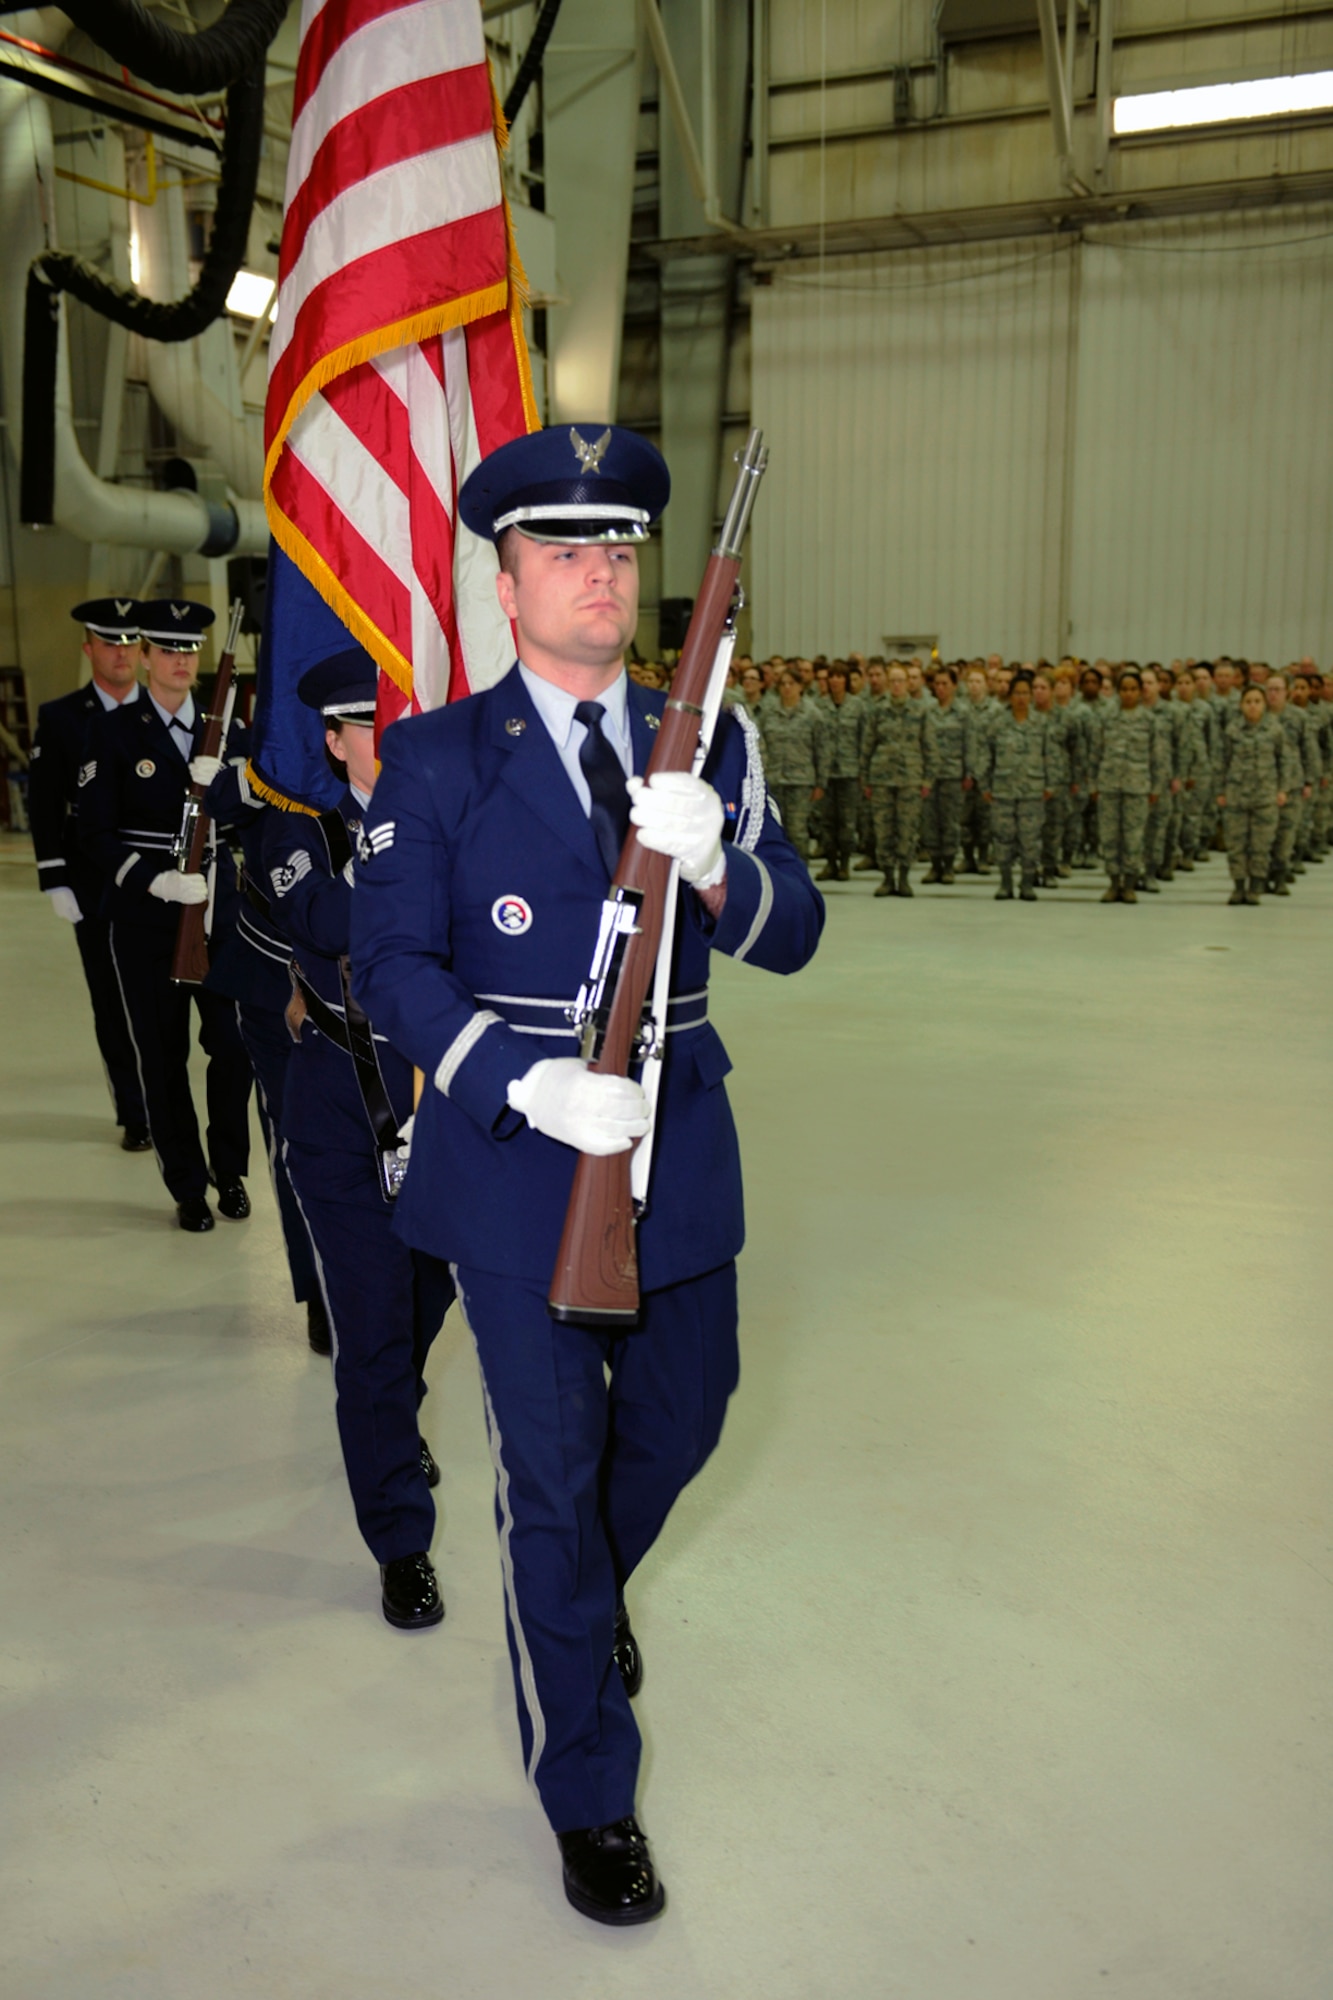 150110-Z-EZ686-153 - Senior Airman Wesley Retka and members of the 127th Wing Honor Guard present colors during the 127th Wing Outstanding Airman of the Year award ceremony at Selfridge Air National Guard Base Mich., on Jan. 10, 2015.  The Outstanding Airman of the Year ceremony is an annual formation in which Airmen are recognized for their achievements during the year.  (U.S. Air National Guard photo by MSgt. David Kujawa/Released)